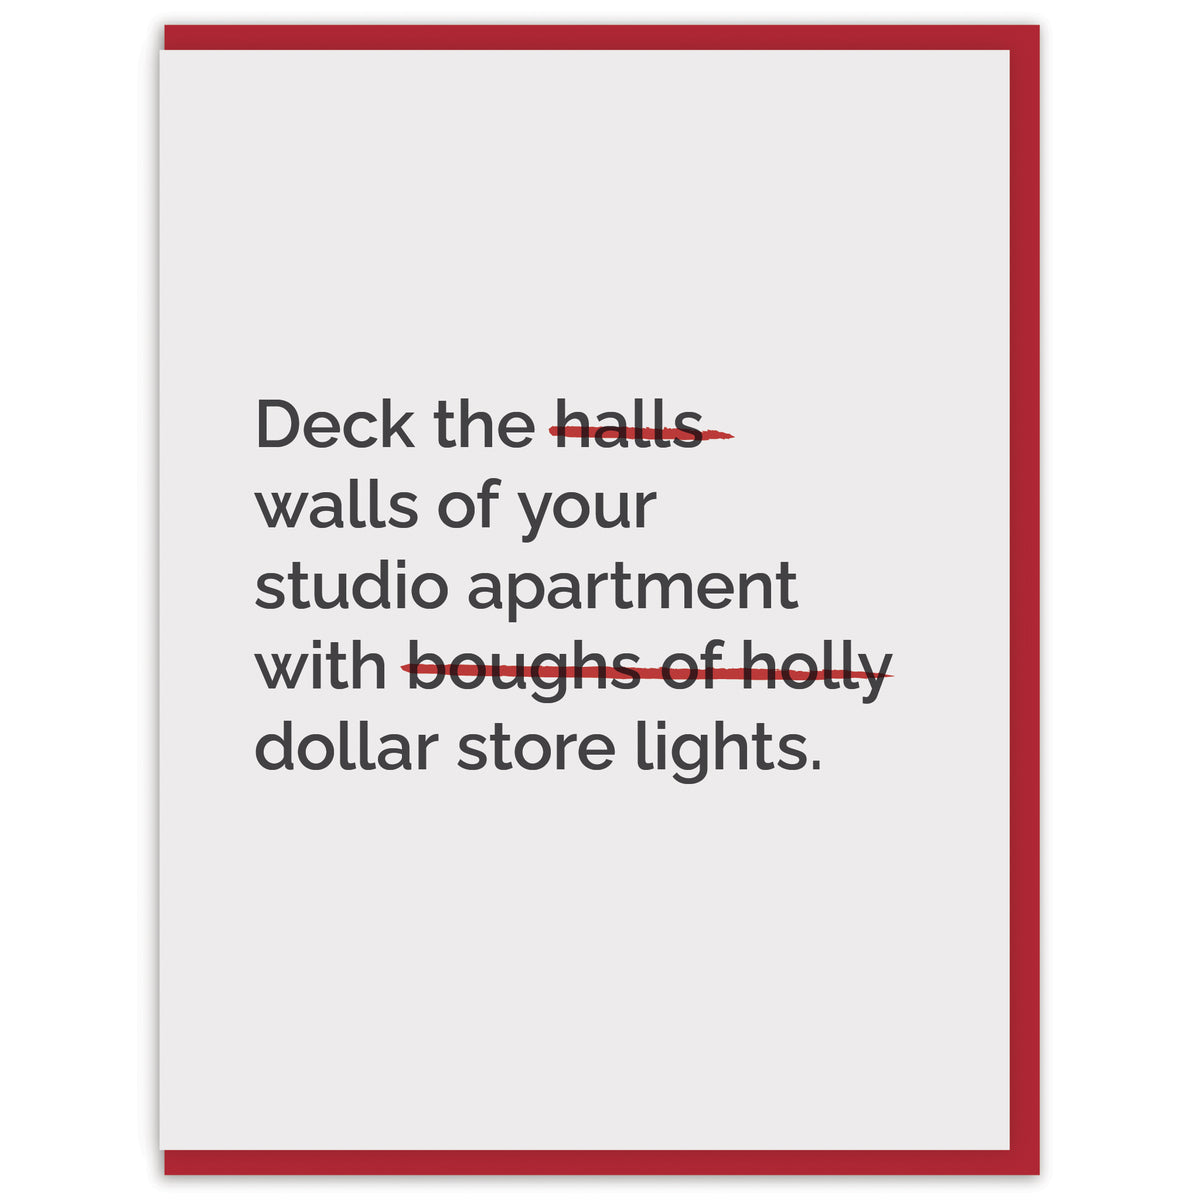 Deck the walls of your studio apartment with dollar store lights.